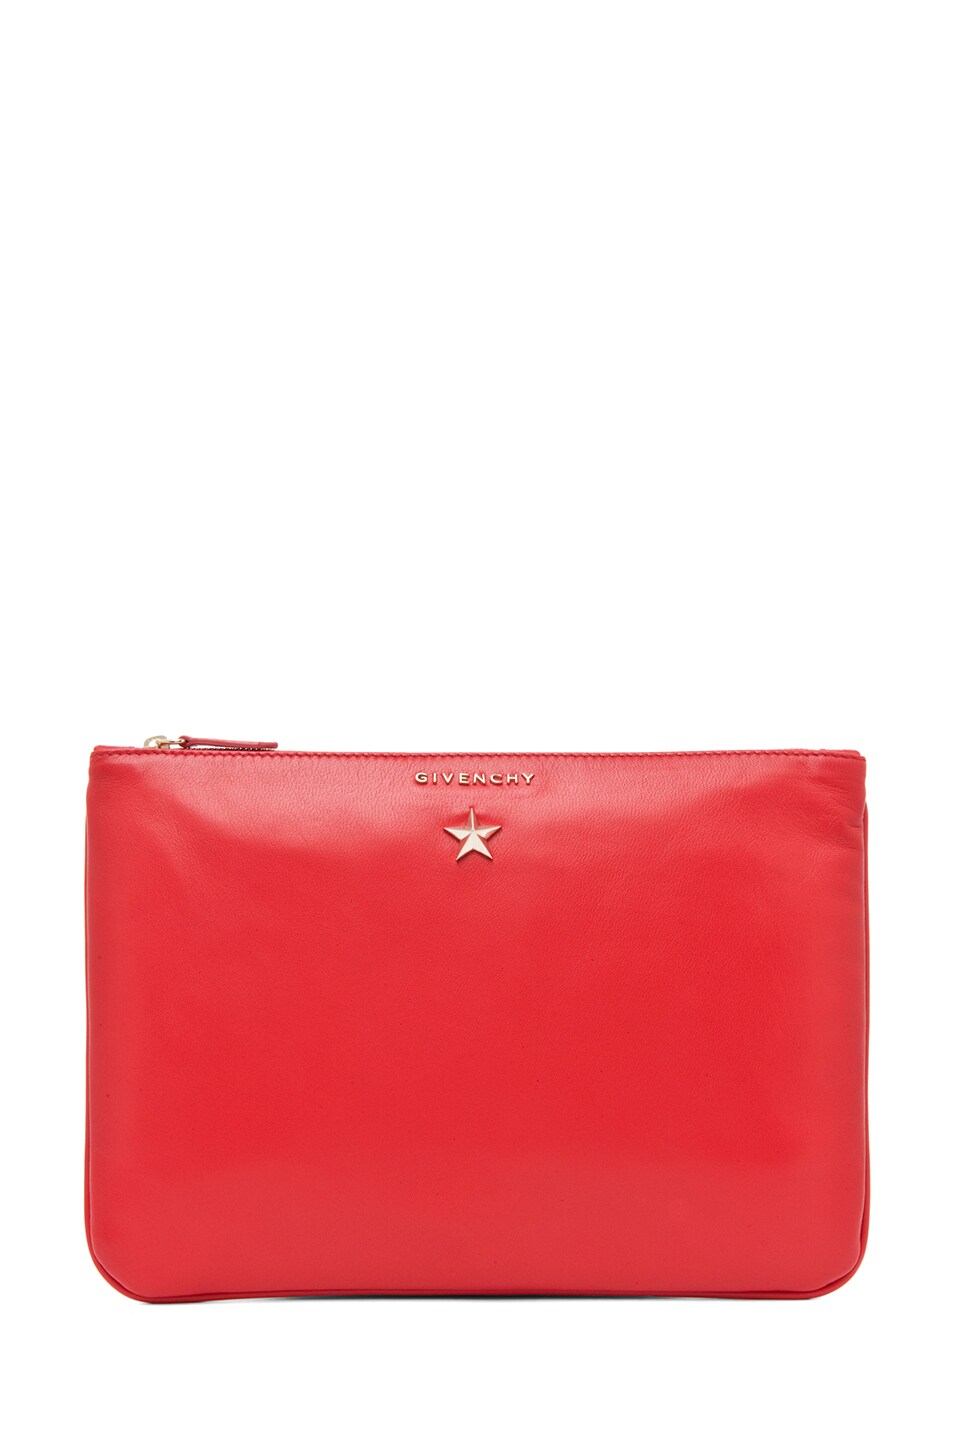 Image 1 of Givenchy Medium Star Pouch in Red